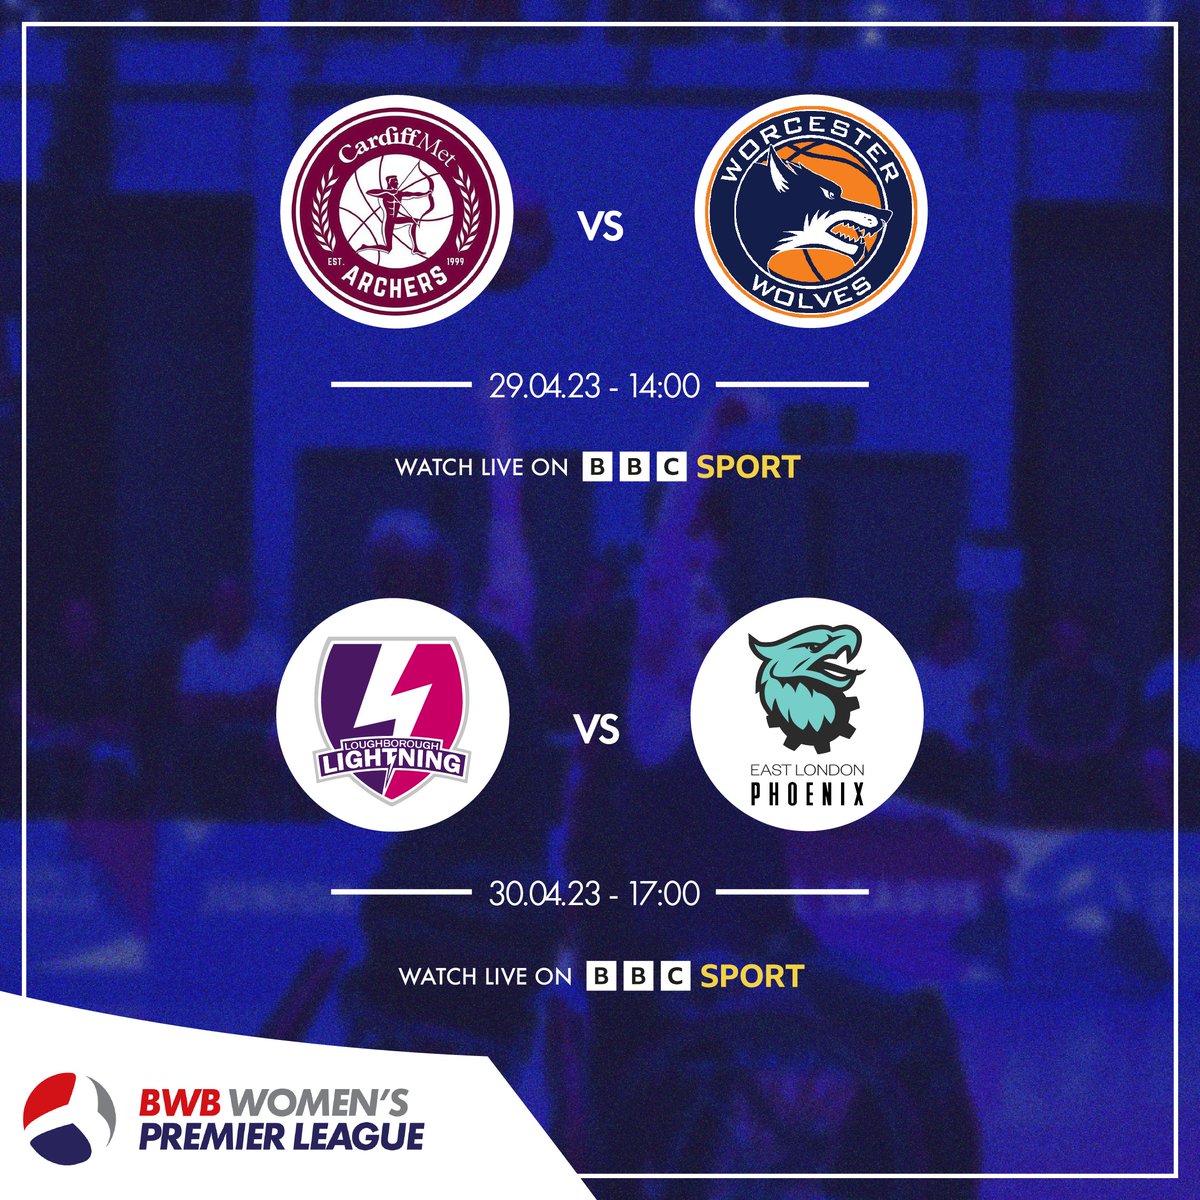 A reminder of the #BWBWPL action on BBC Sport this weekend... 🏹 @ArchersBasket vs @WBPLWolves 🐺 📆 Saturday 29th April, 2pm 📺 BBC Sport ⚡ @Lightningwbbl vs @EastLDNPhoenix 🔥 📆 Sunday 30th April, 5pm 📺 BBC Sport Livestreams / tickets: britishwheelchairbasketball.co.uk/wpl-fanzone-20…